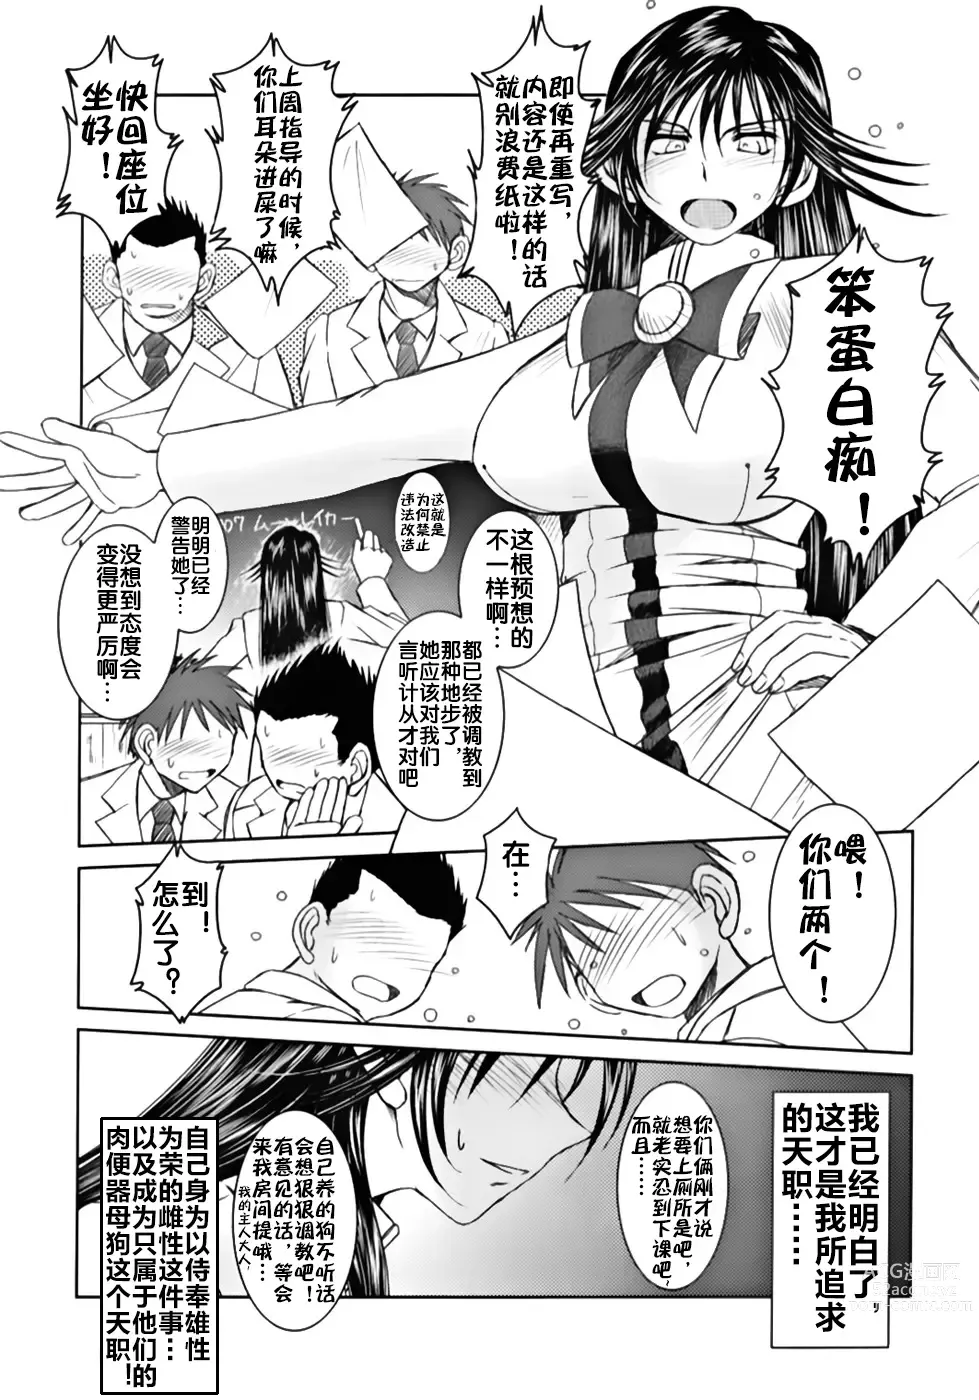 Page 21 of doujinshi 真红蔷薇